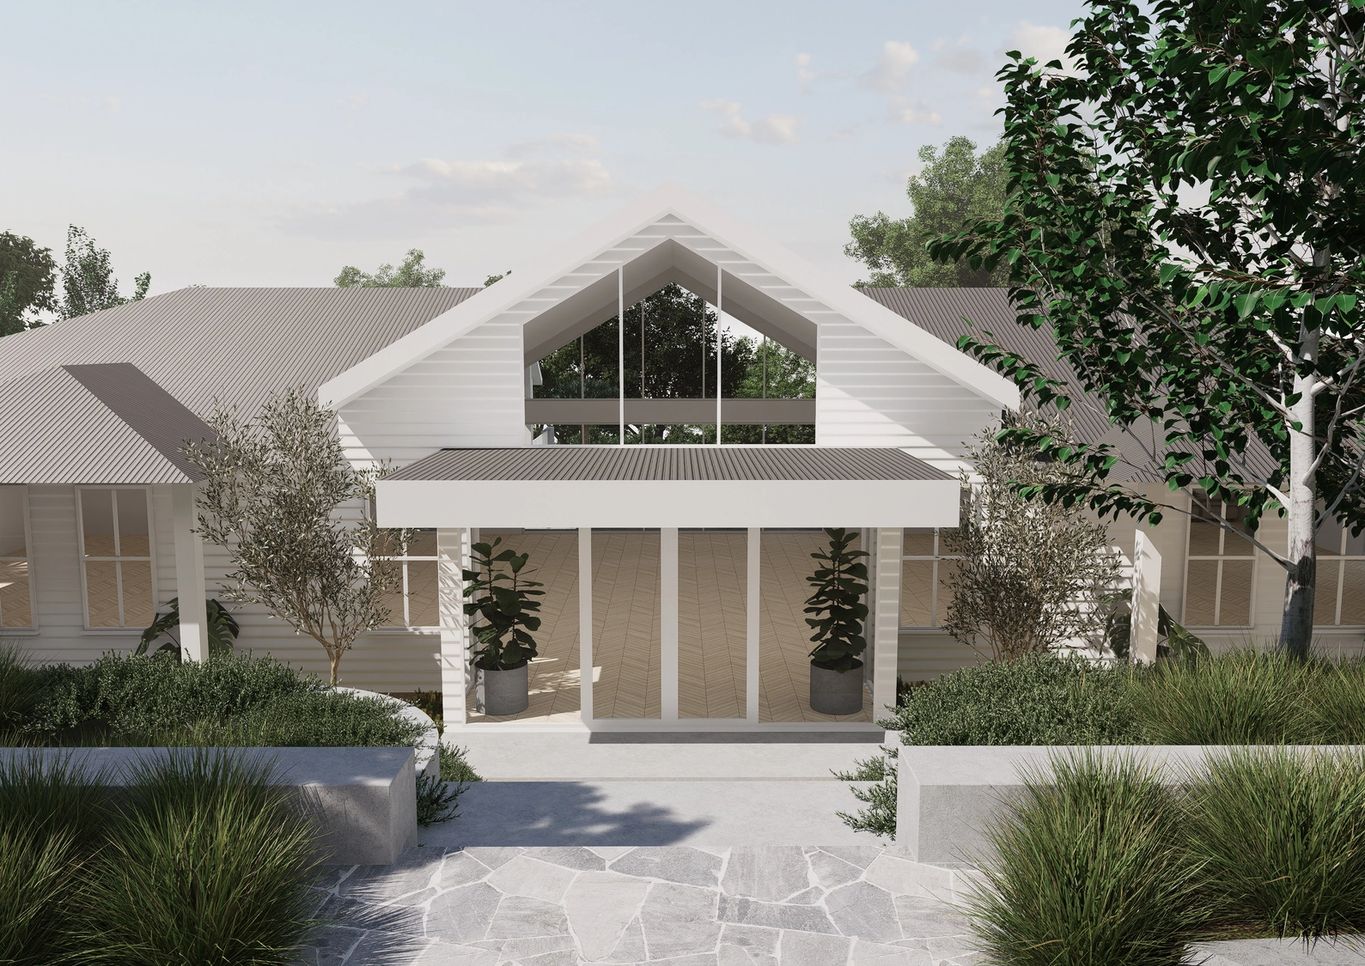 Landscape design of front entry of white sprawling modern country home featuring crazy paving